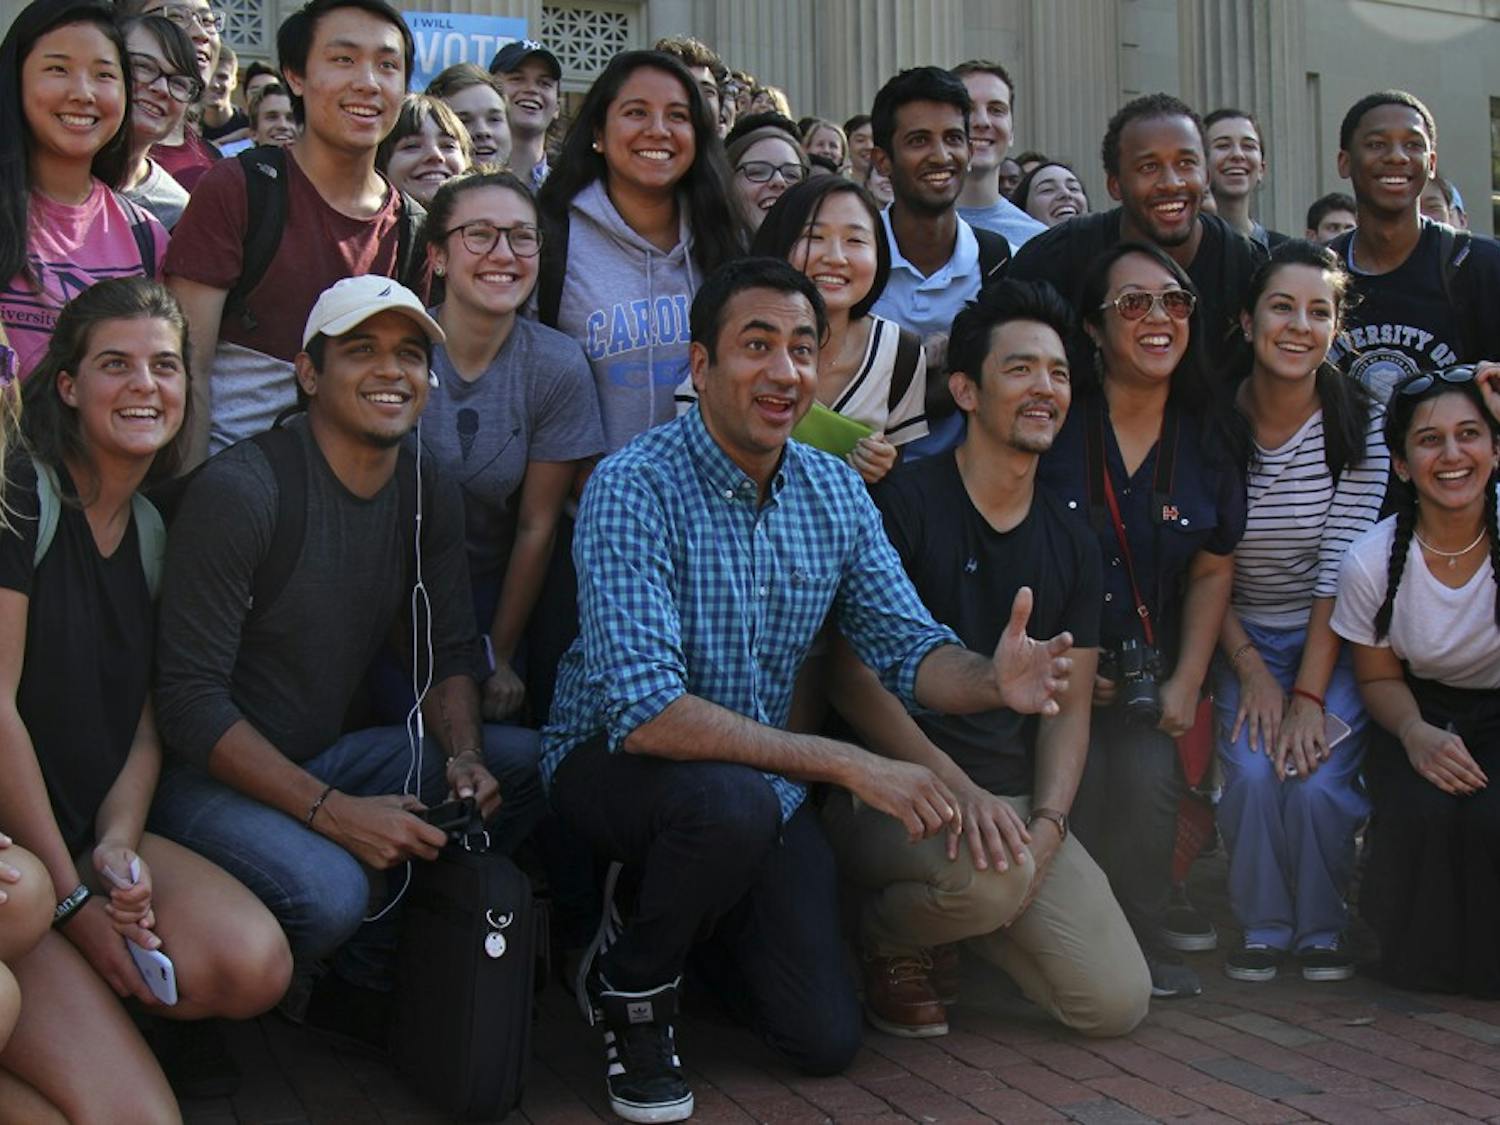 Kal Penn (left) and John Cho (right), the comedy duo from the Harold and Kumar movie series, visited UNC Tuesday to encourage early voting.